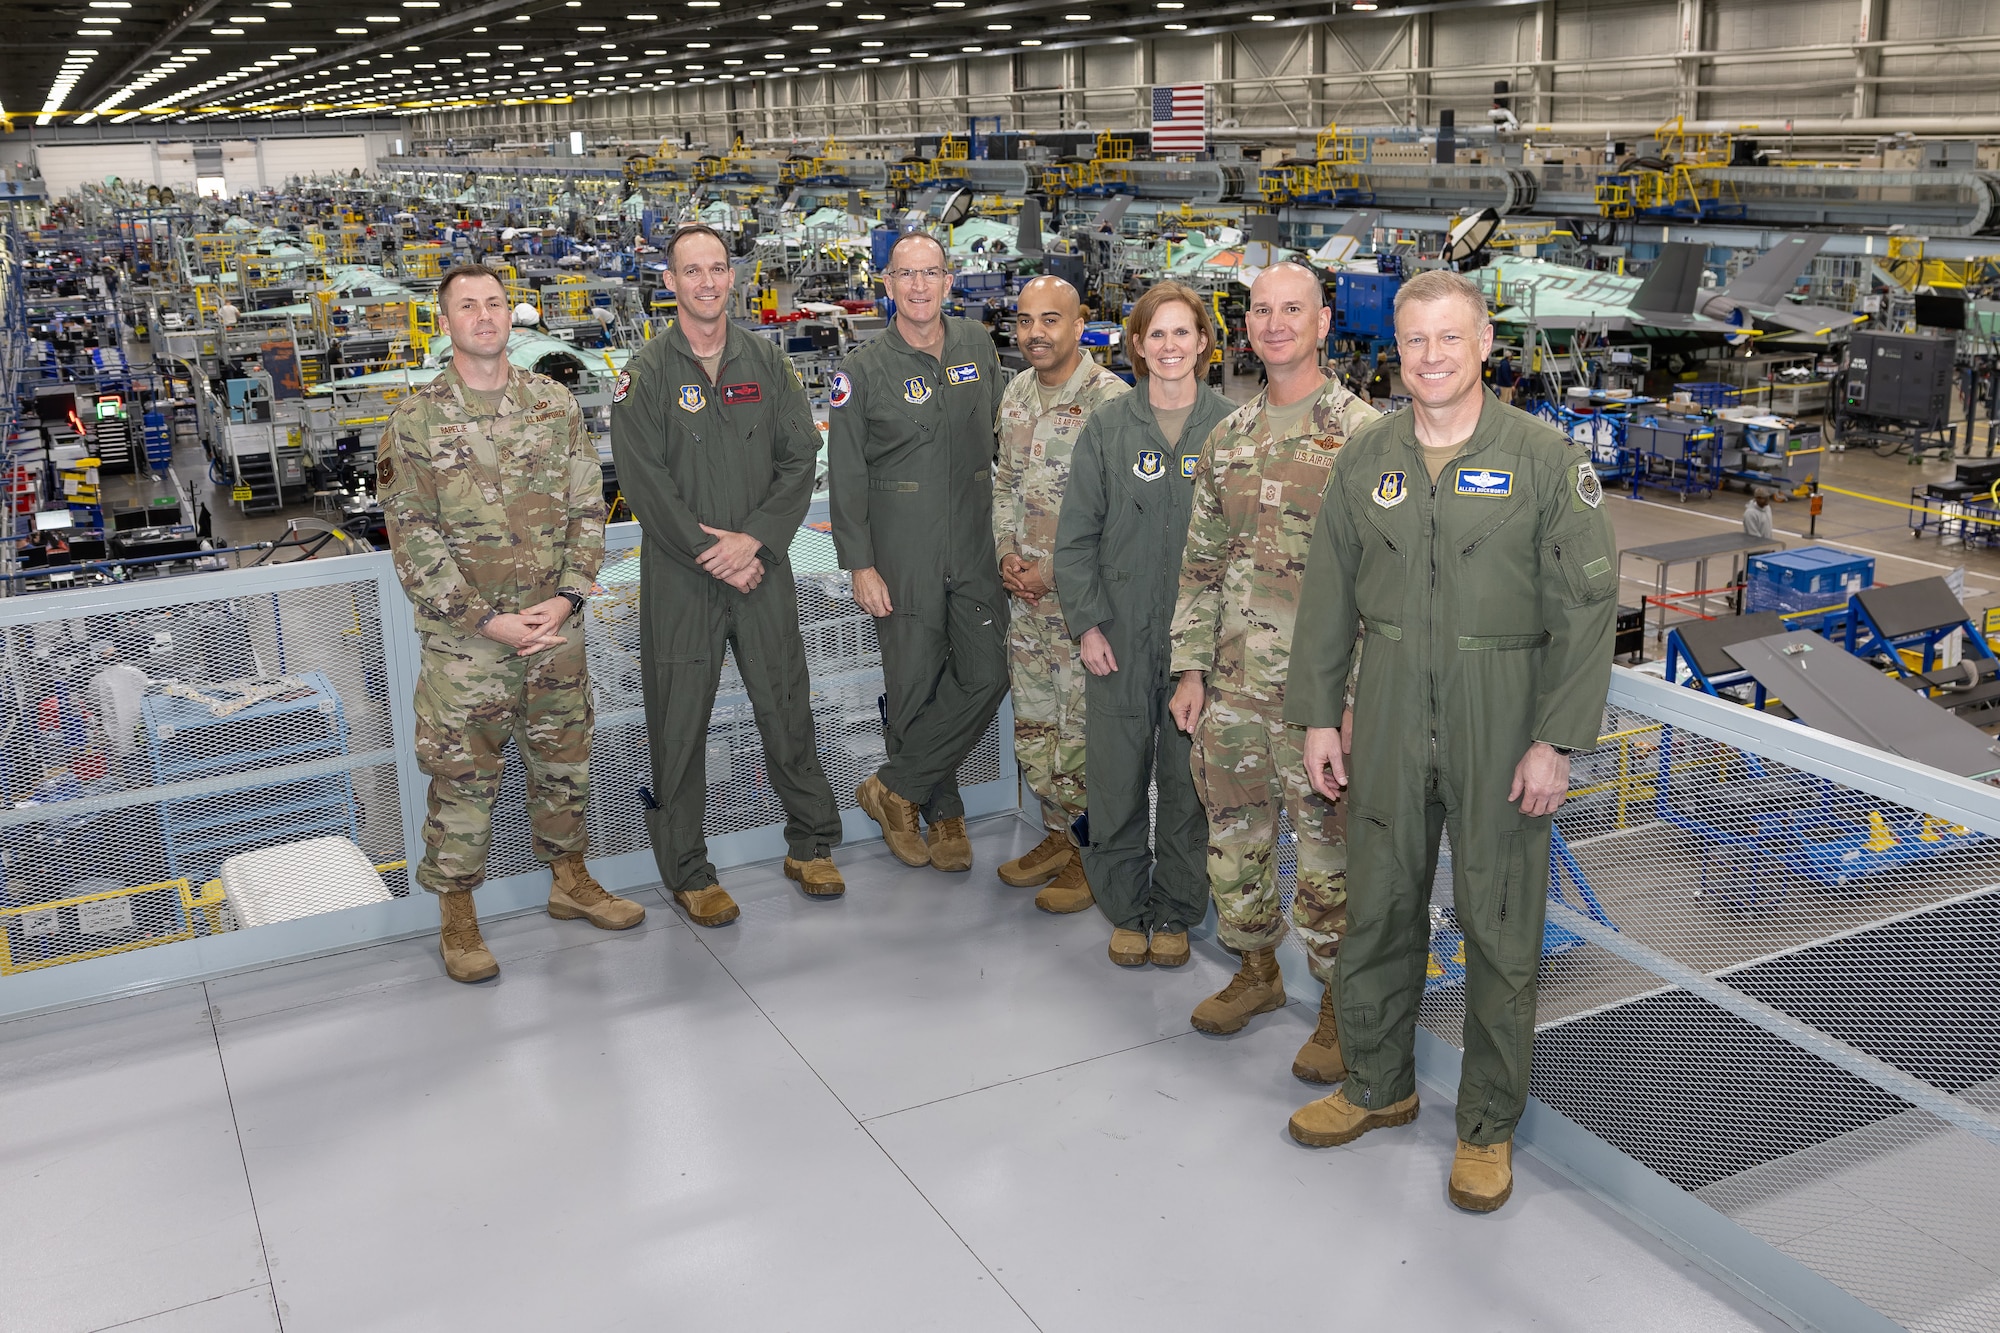 From left, 301st Fighter Wing Command Chief Master Sgt. Jonathan Rapelje, 301st Fighter Wing Commander Col. Benjamin R. Harrison, Lt. Gen. John Healy, commander of the Air Force Reserve Command, Air Force Reserve Command Chief Master Sgt. Israel Nunez, Brig. Gen. Gina Sabric, commander, 10th Air Force, Air Force Command Chief Master Sgt. Christopher S. Bluto, Jr., and 10th Air Force Deputy Commander Col. Allen Duckworth, stand above the massive F-35 production line April, 2 2024. (Photos courtesy of Lockheed Martin Aeronautics Company)